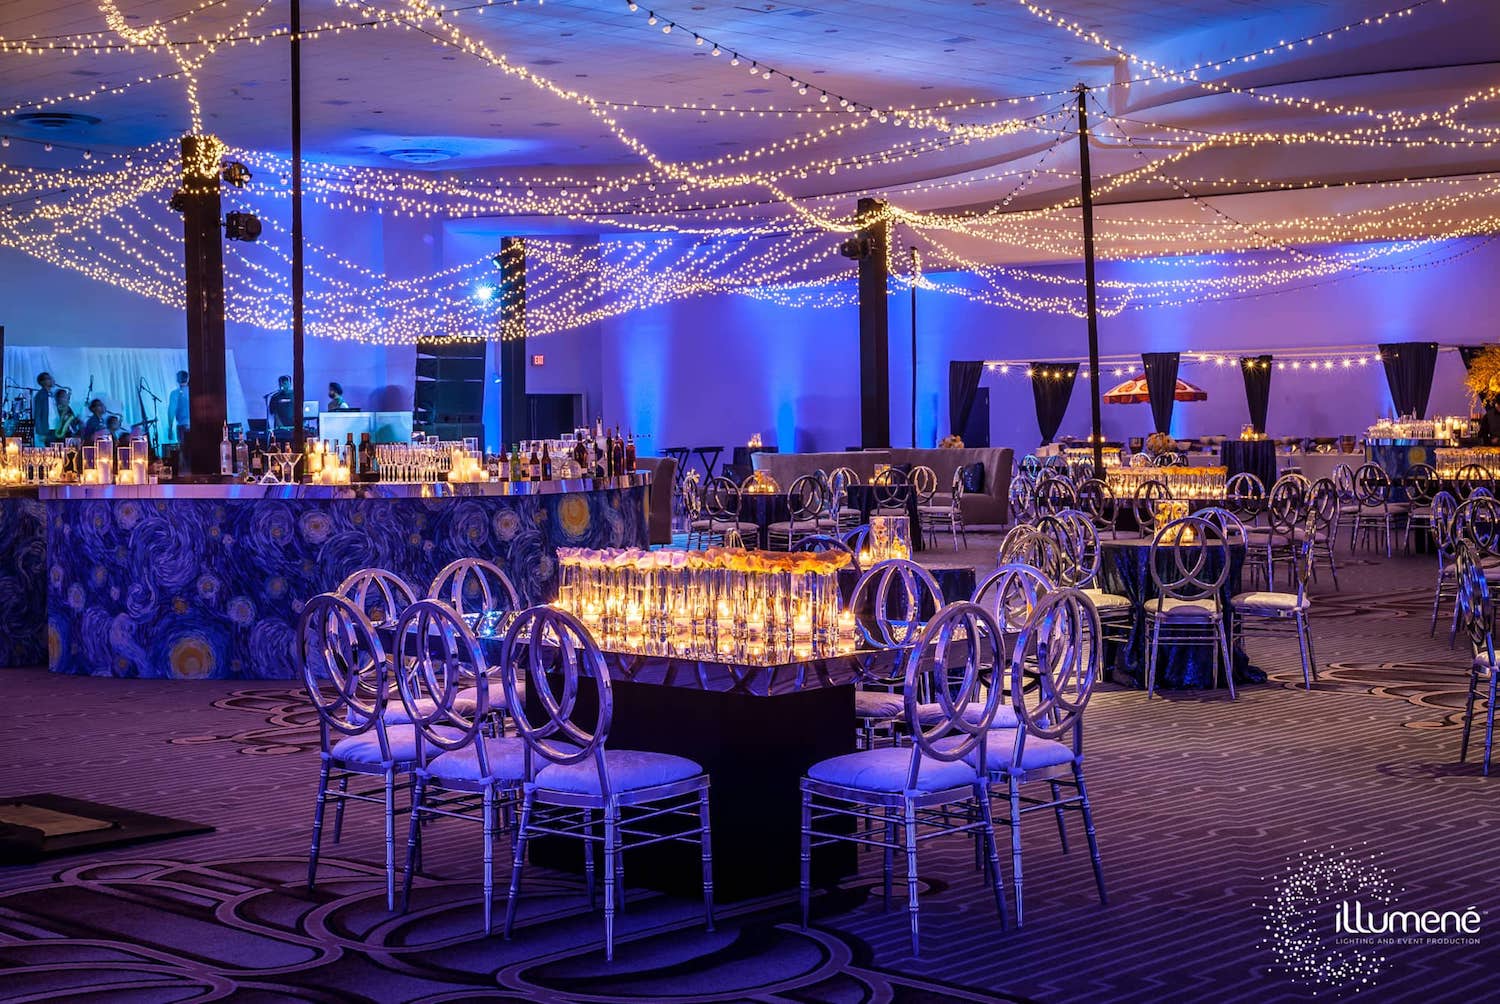 gala corporate event lighting miami beach fontainebleau rent uplighting for gala string lights christmas lights